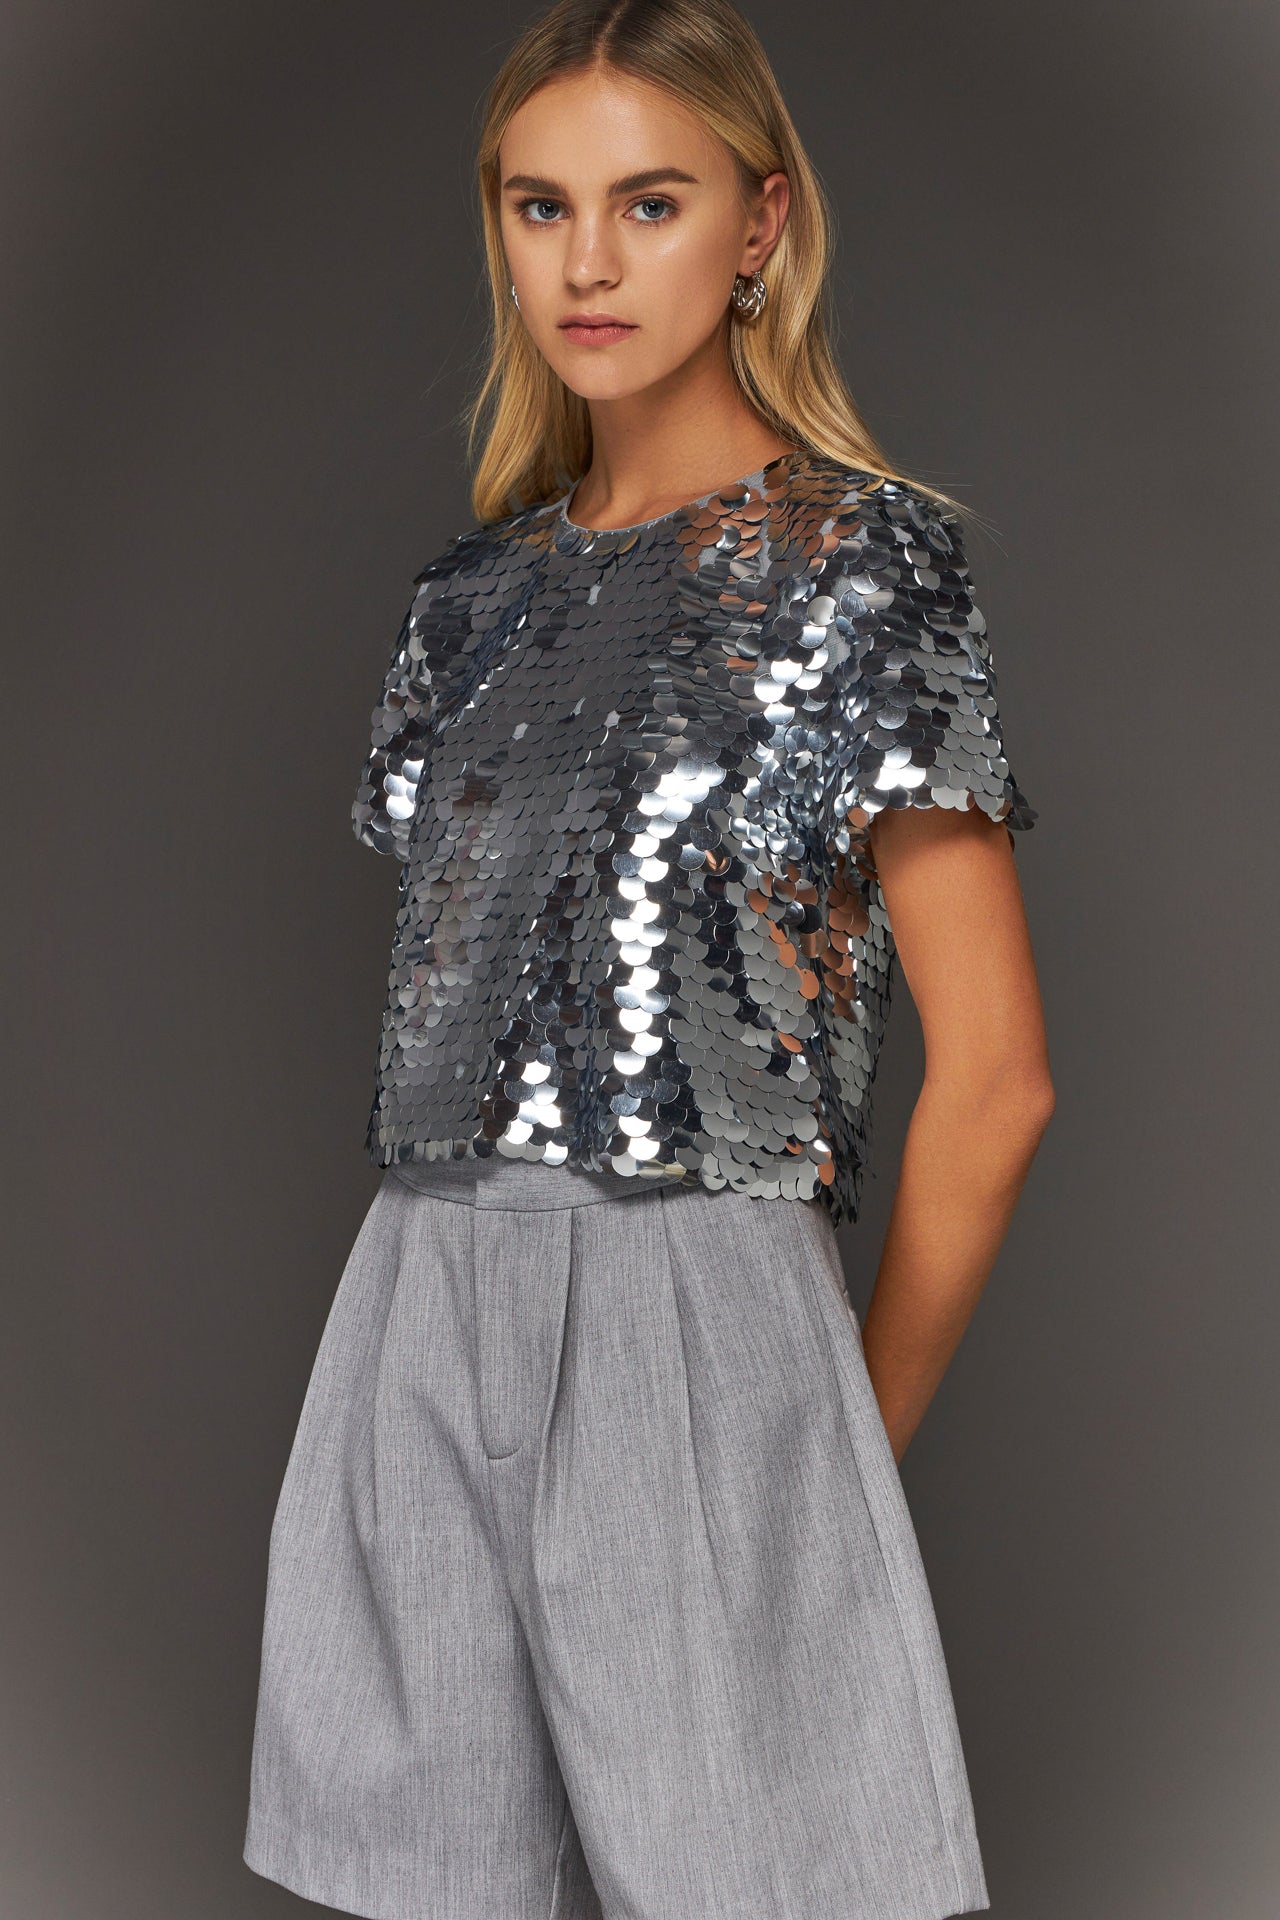 Endless Rose - Sequin Crop Top - Tops in Women's Clothing available at endlessrose.com